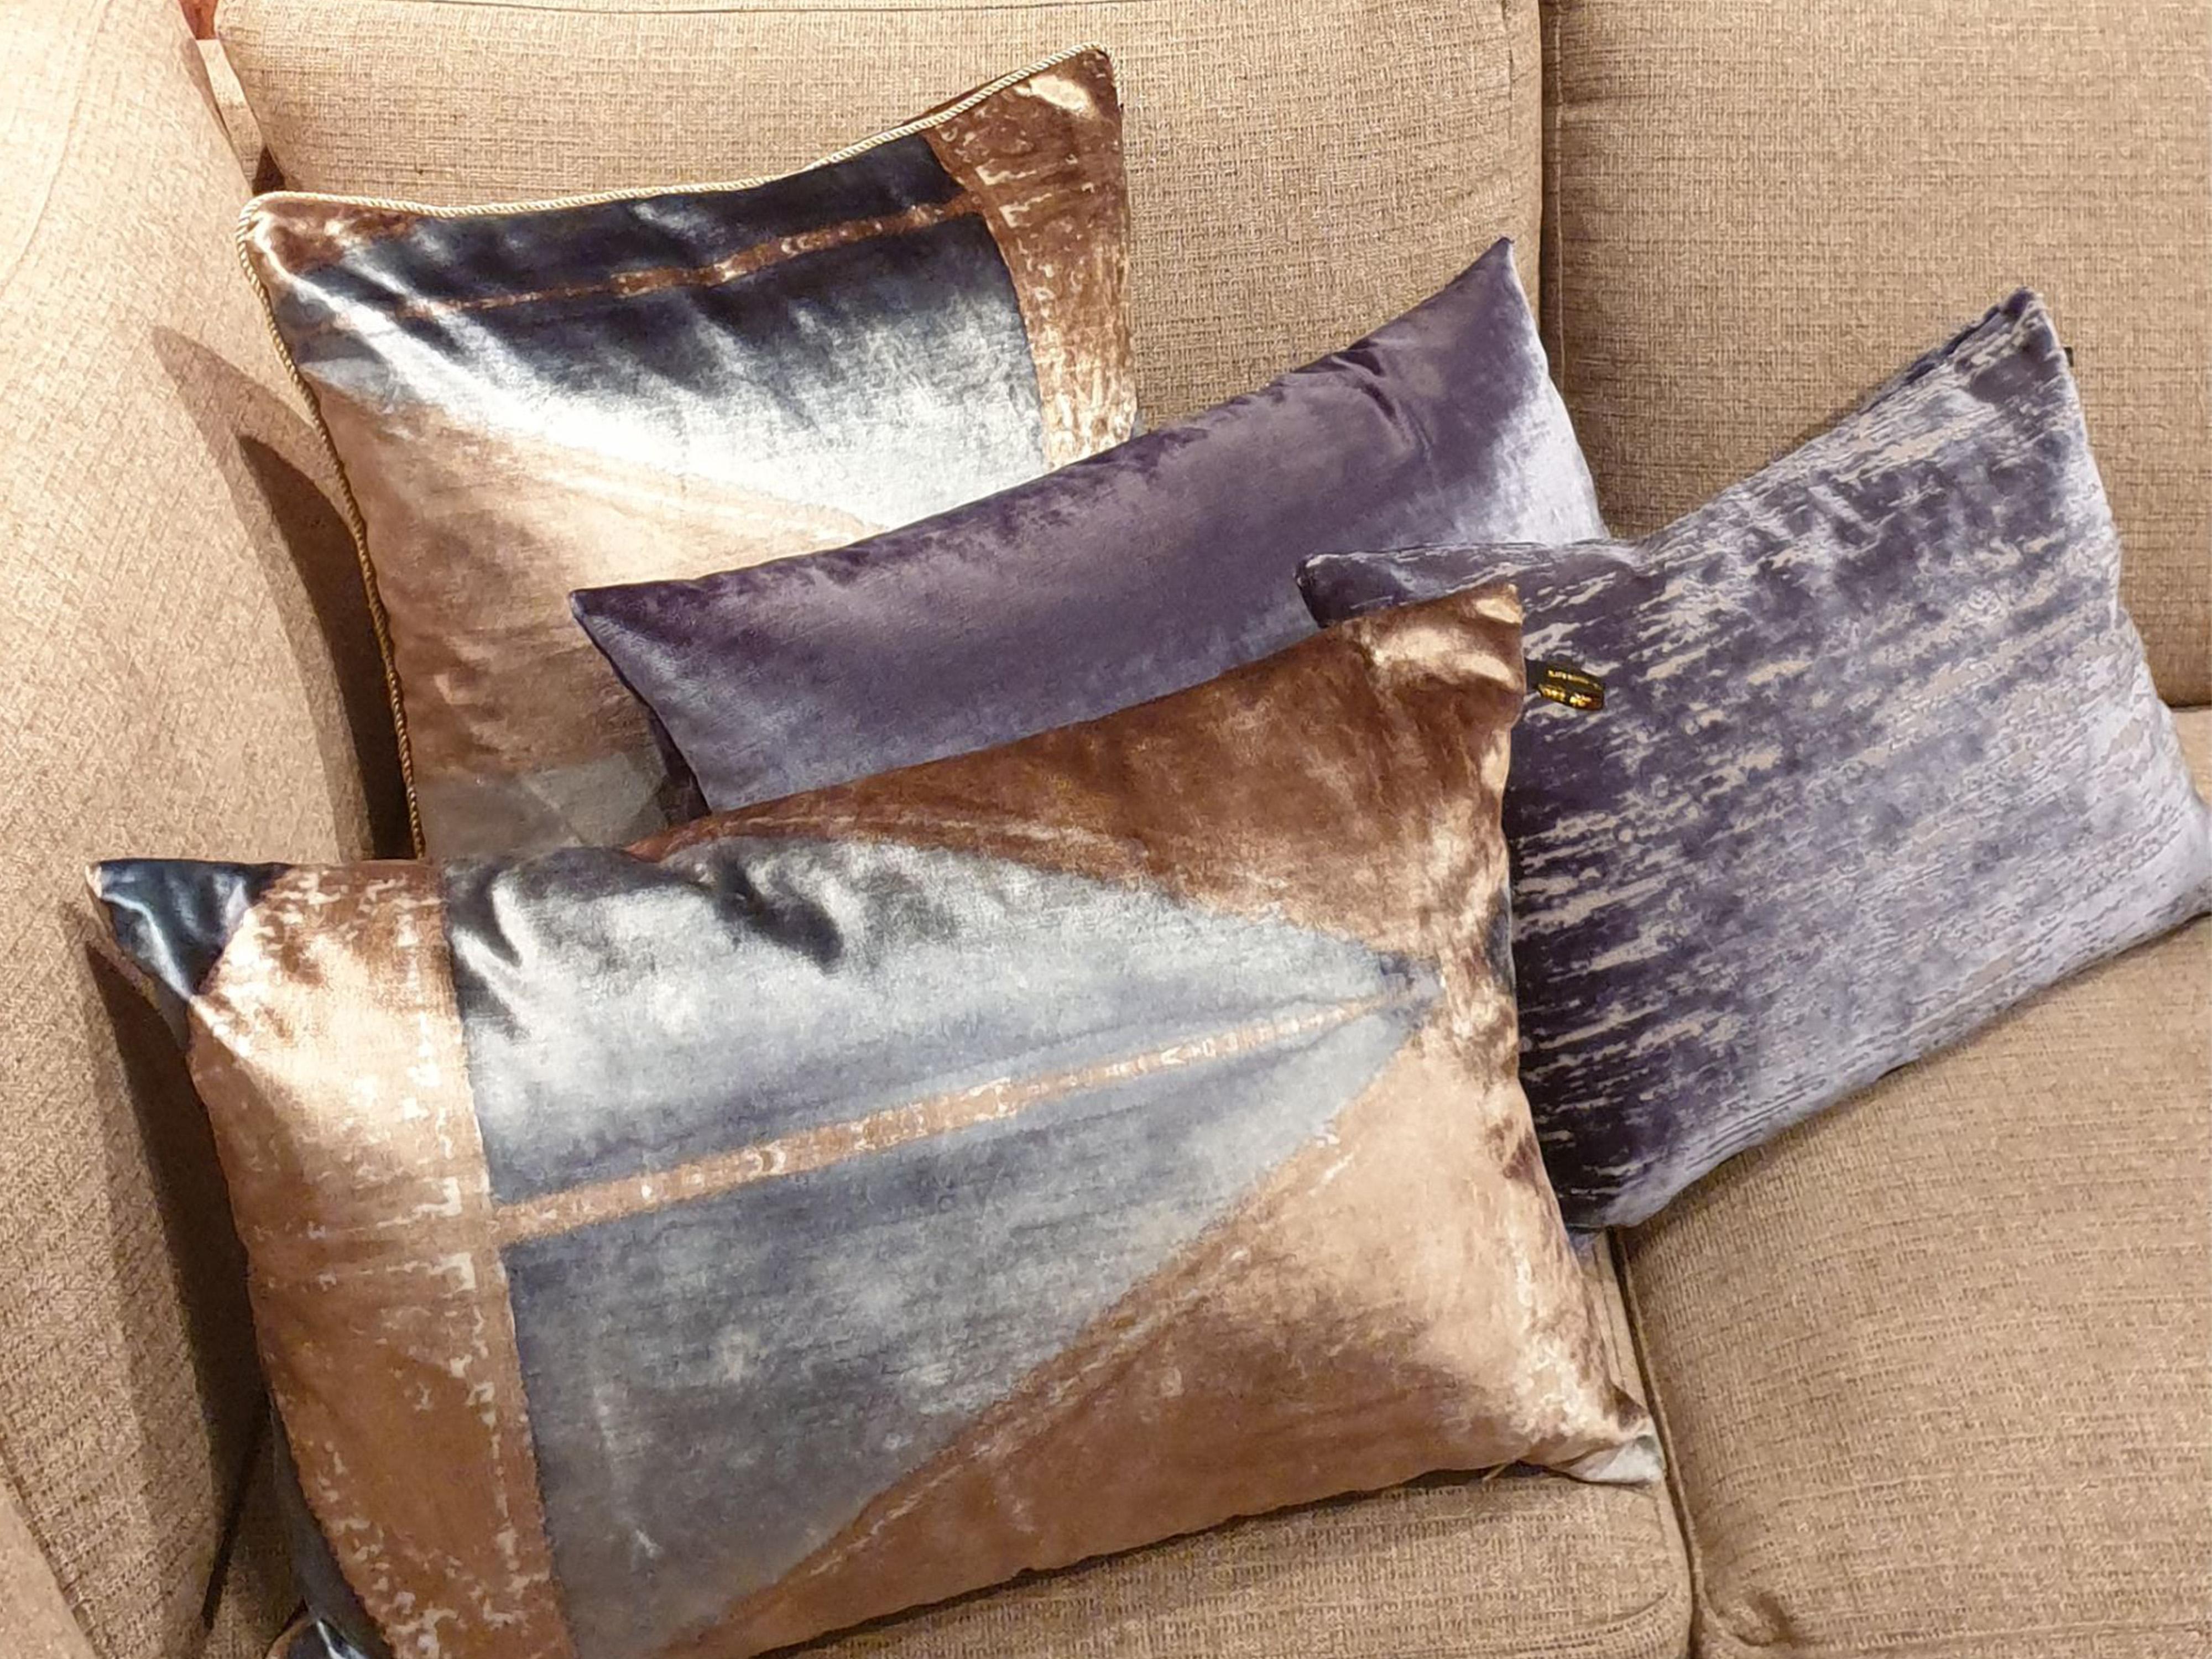 Chantal Keizer, the founder of EST1966, is an Amsterdam-based artist known for her handpainted throw cushions. With a focus on high-end quality and unique Dutch design, EST1966 offers a diverse collection featuring several styles.
Chantal Keizer